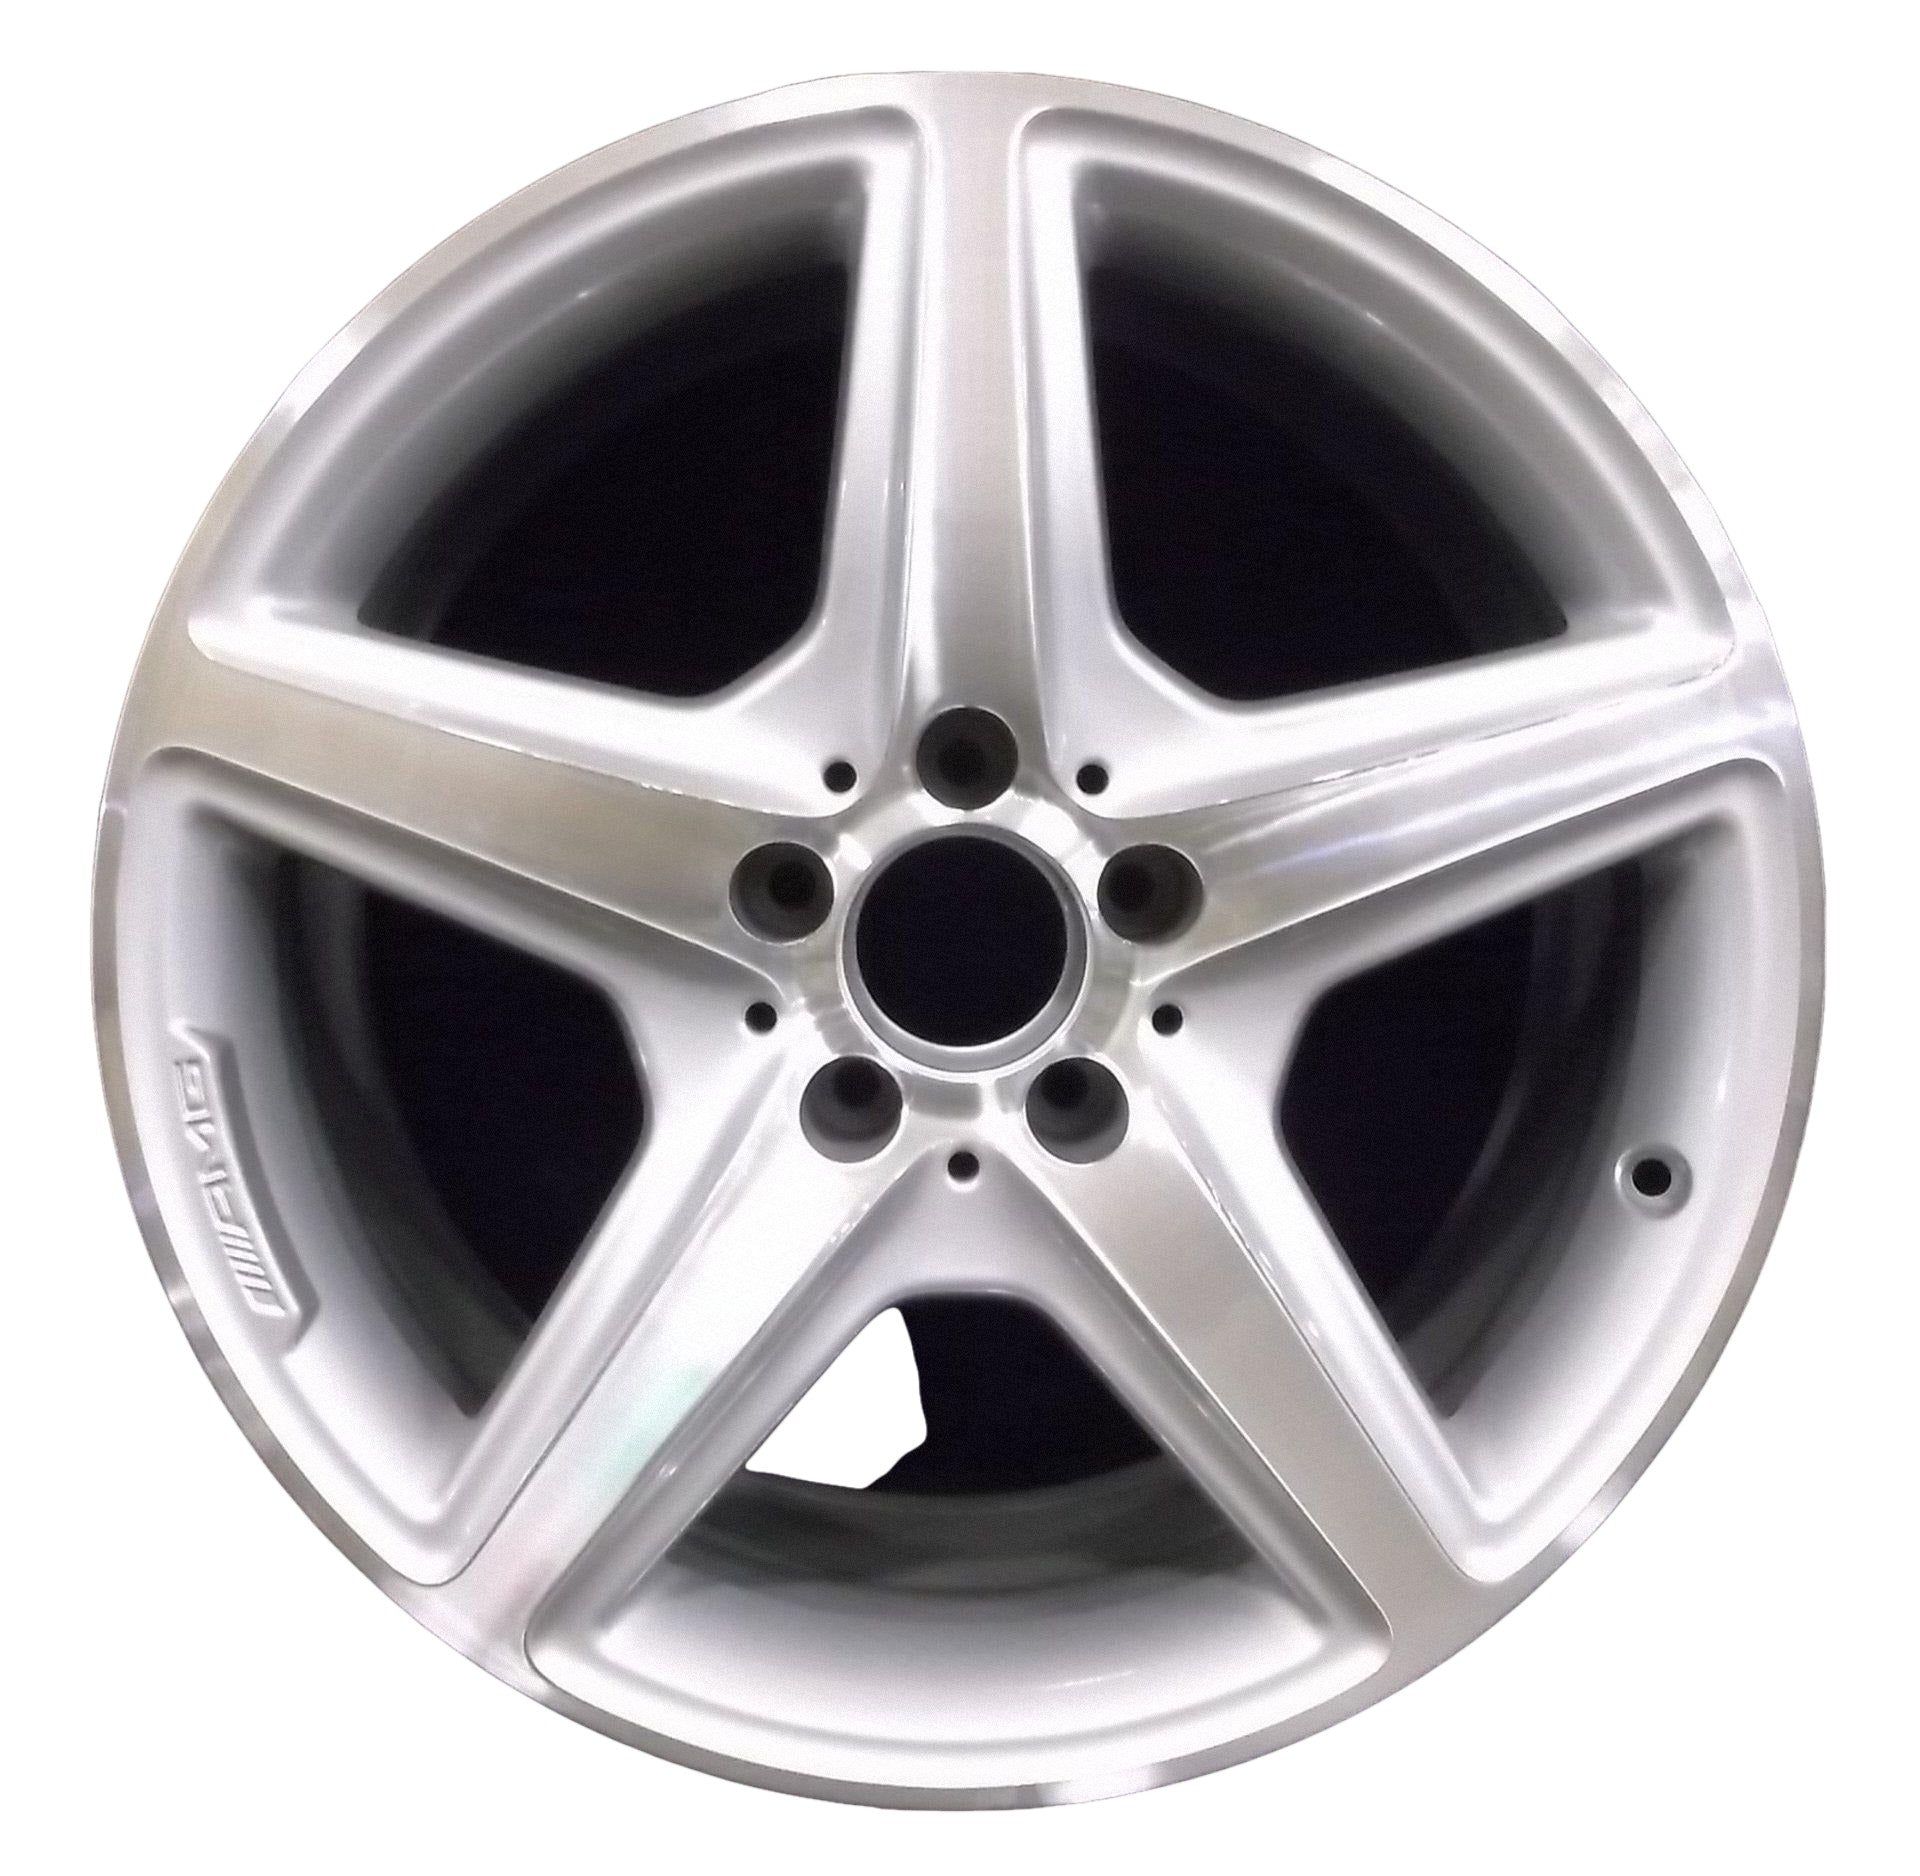 Mercedes CLS550  2012, 2013, 2014, 2015, 2016, 2017, 2018 Factory OEM Car Wheel Size 18x9.5 Alloy WAO.85231RE.PS06.MA